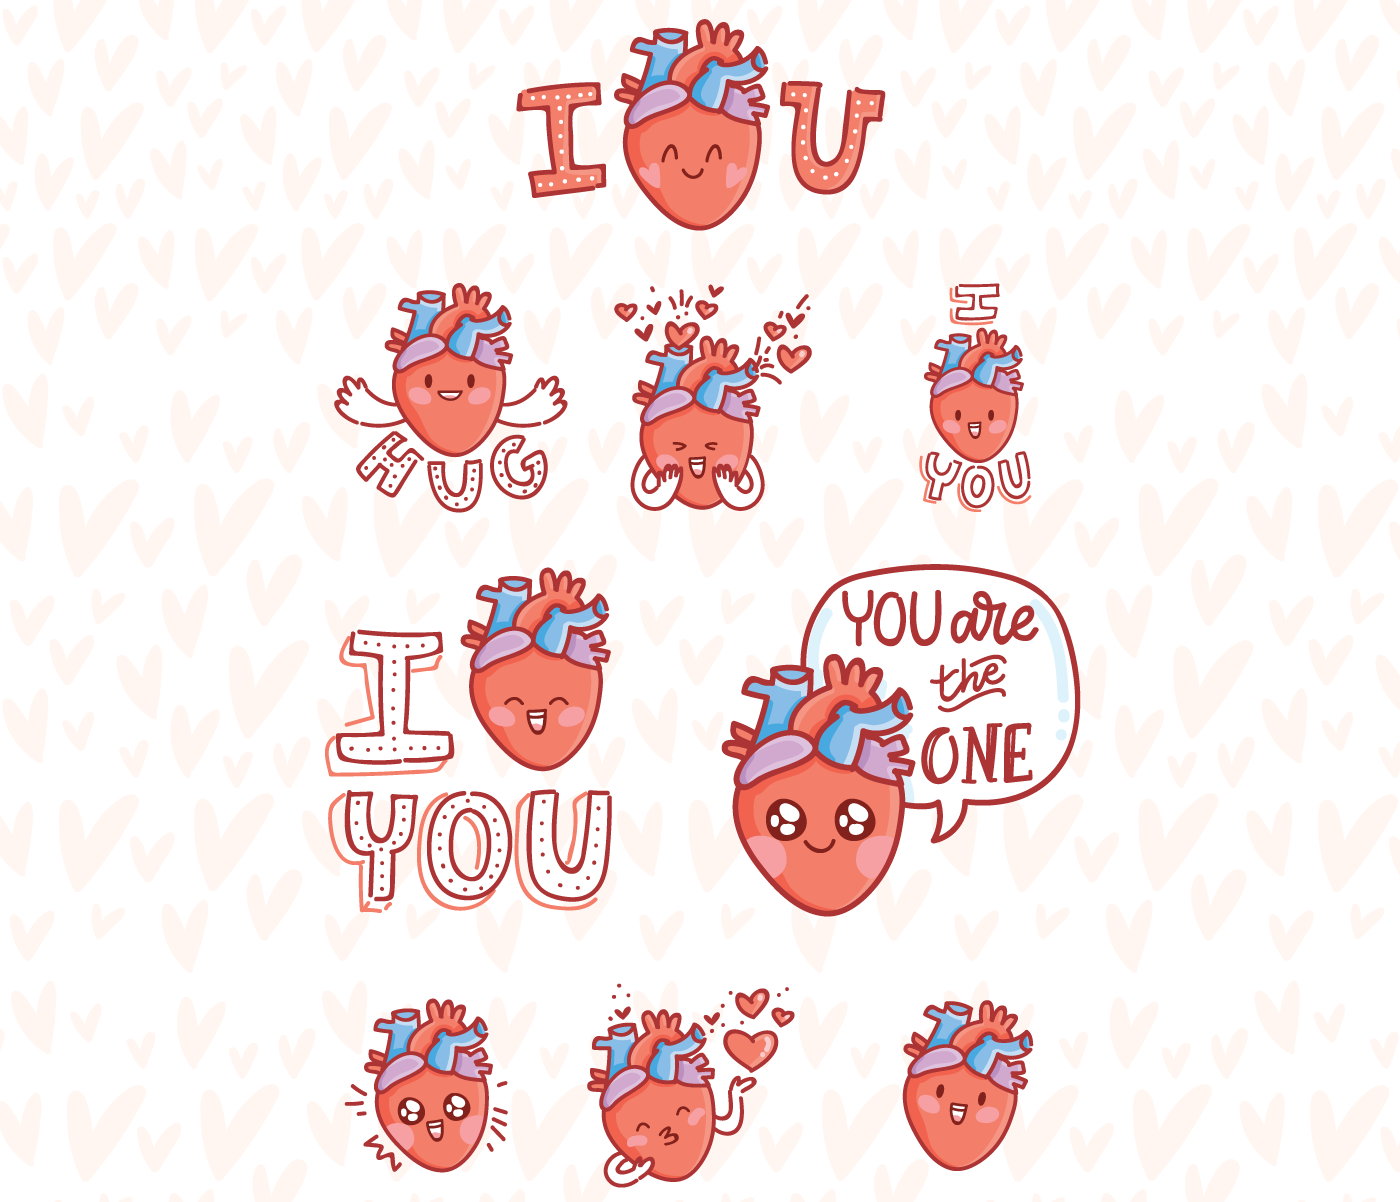 imessage stickers Character heart Love messages app appstore relationship ILLUSTRATION 